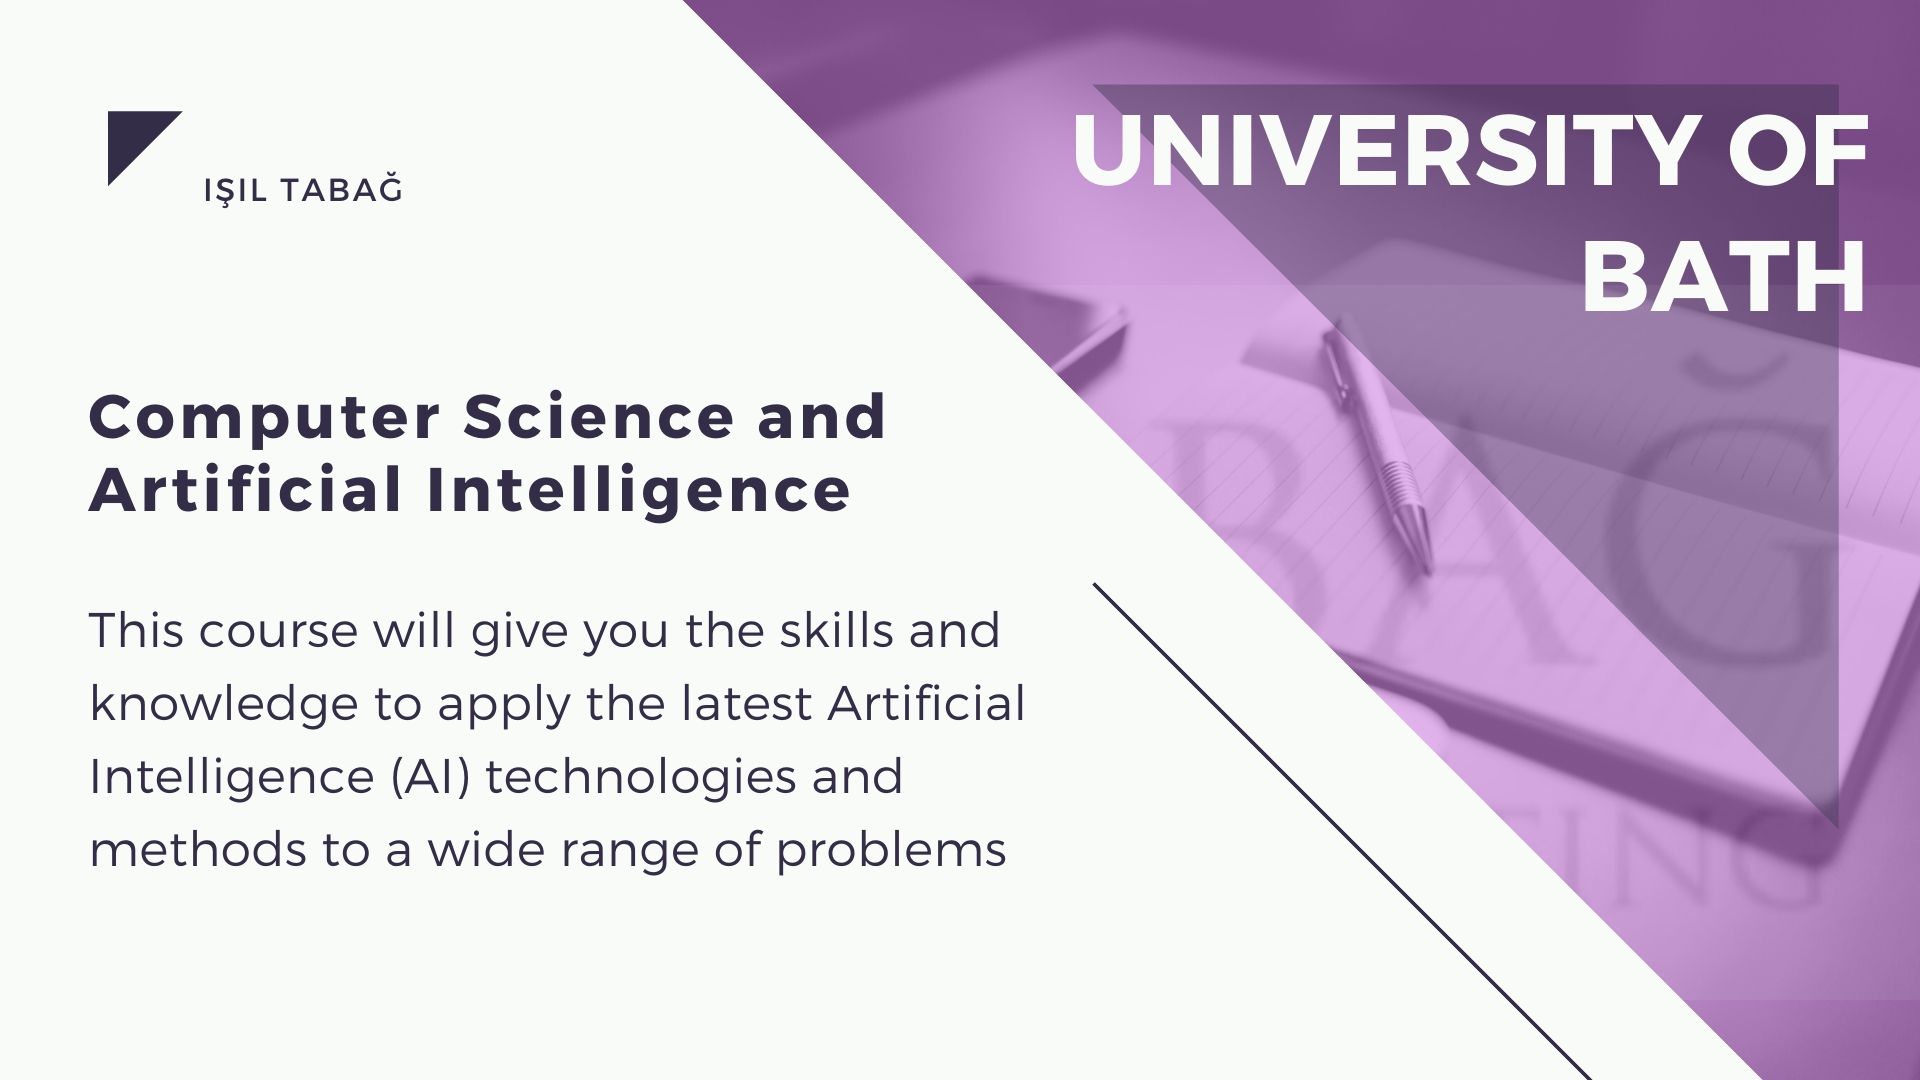 University of Bath computer science artificial intelligence 